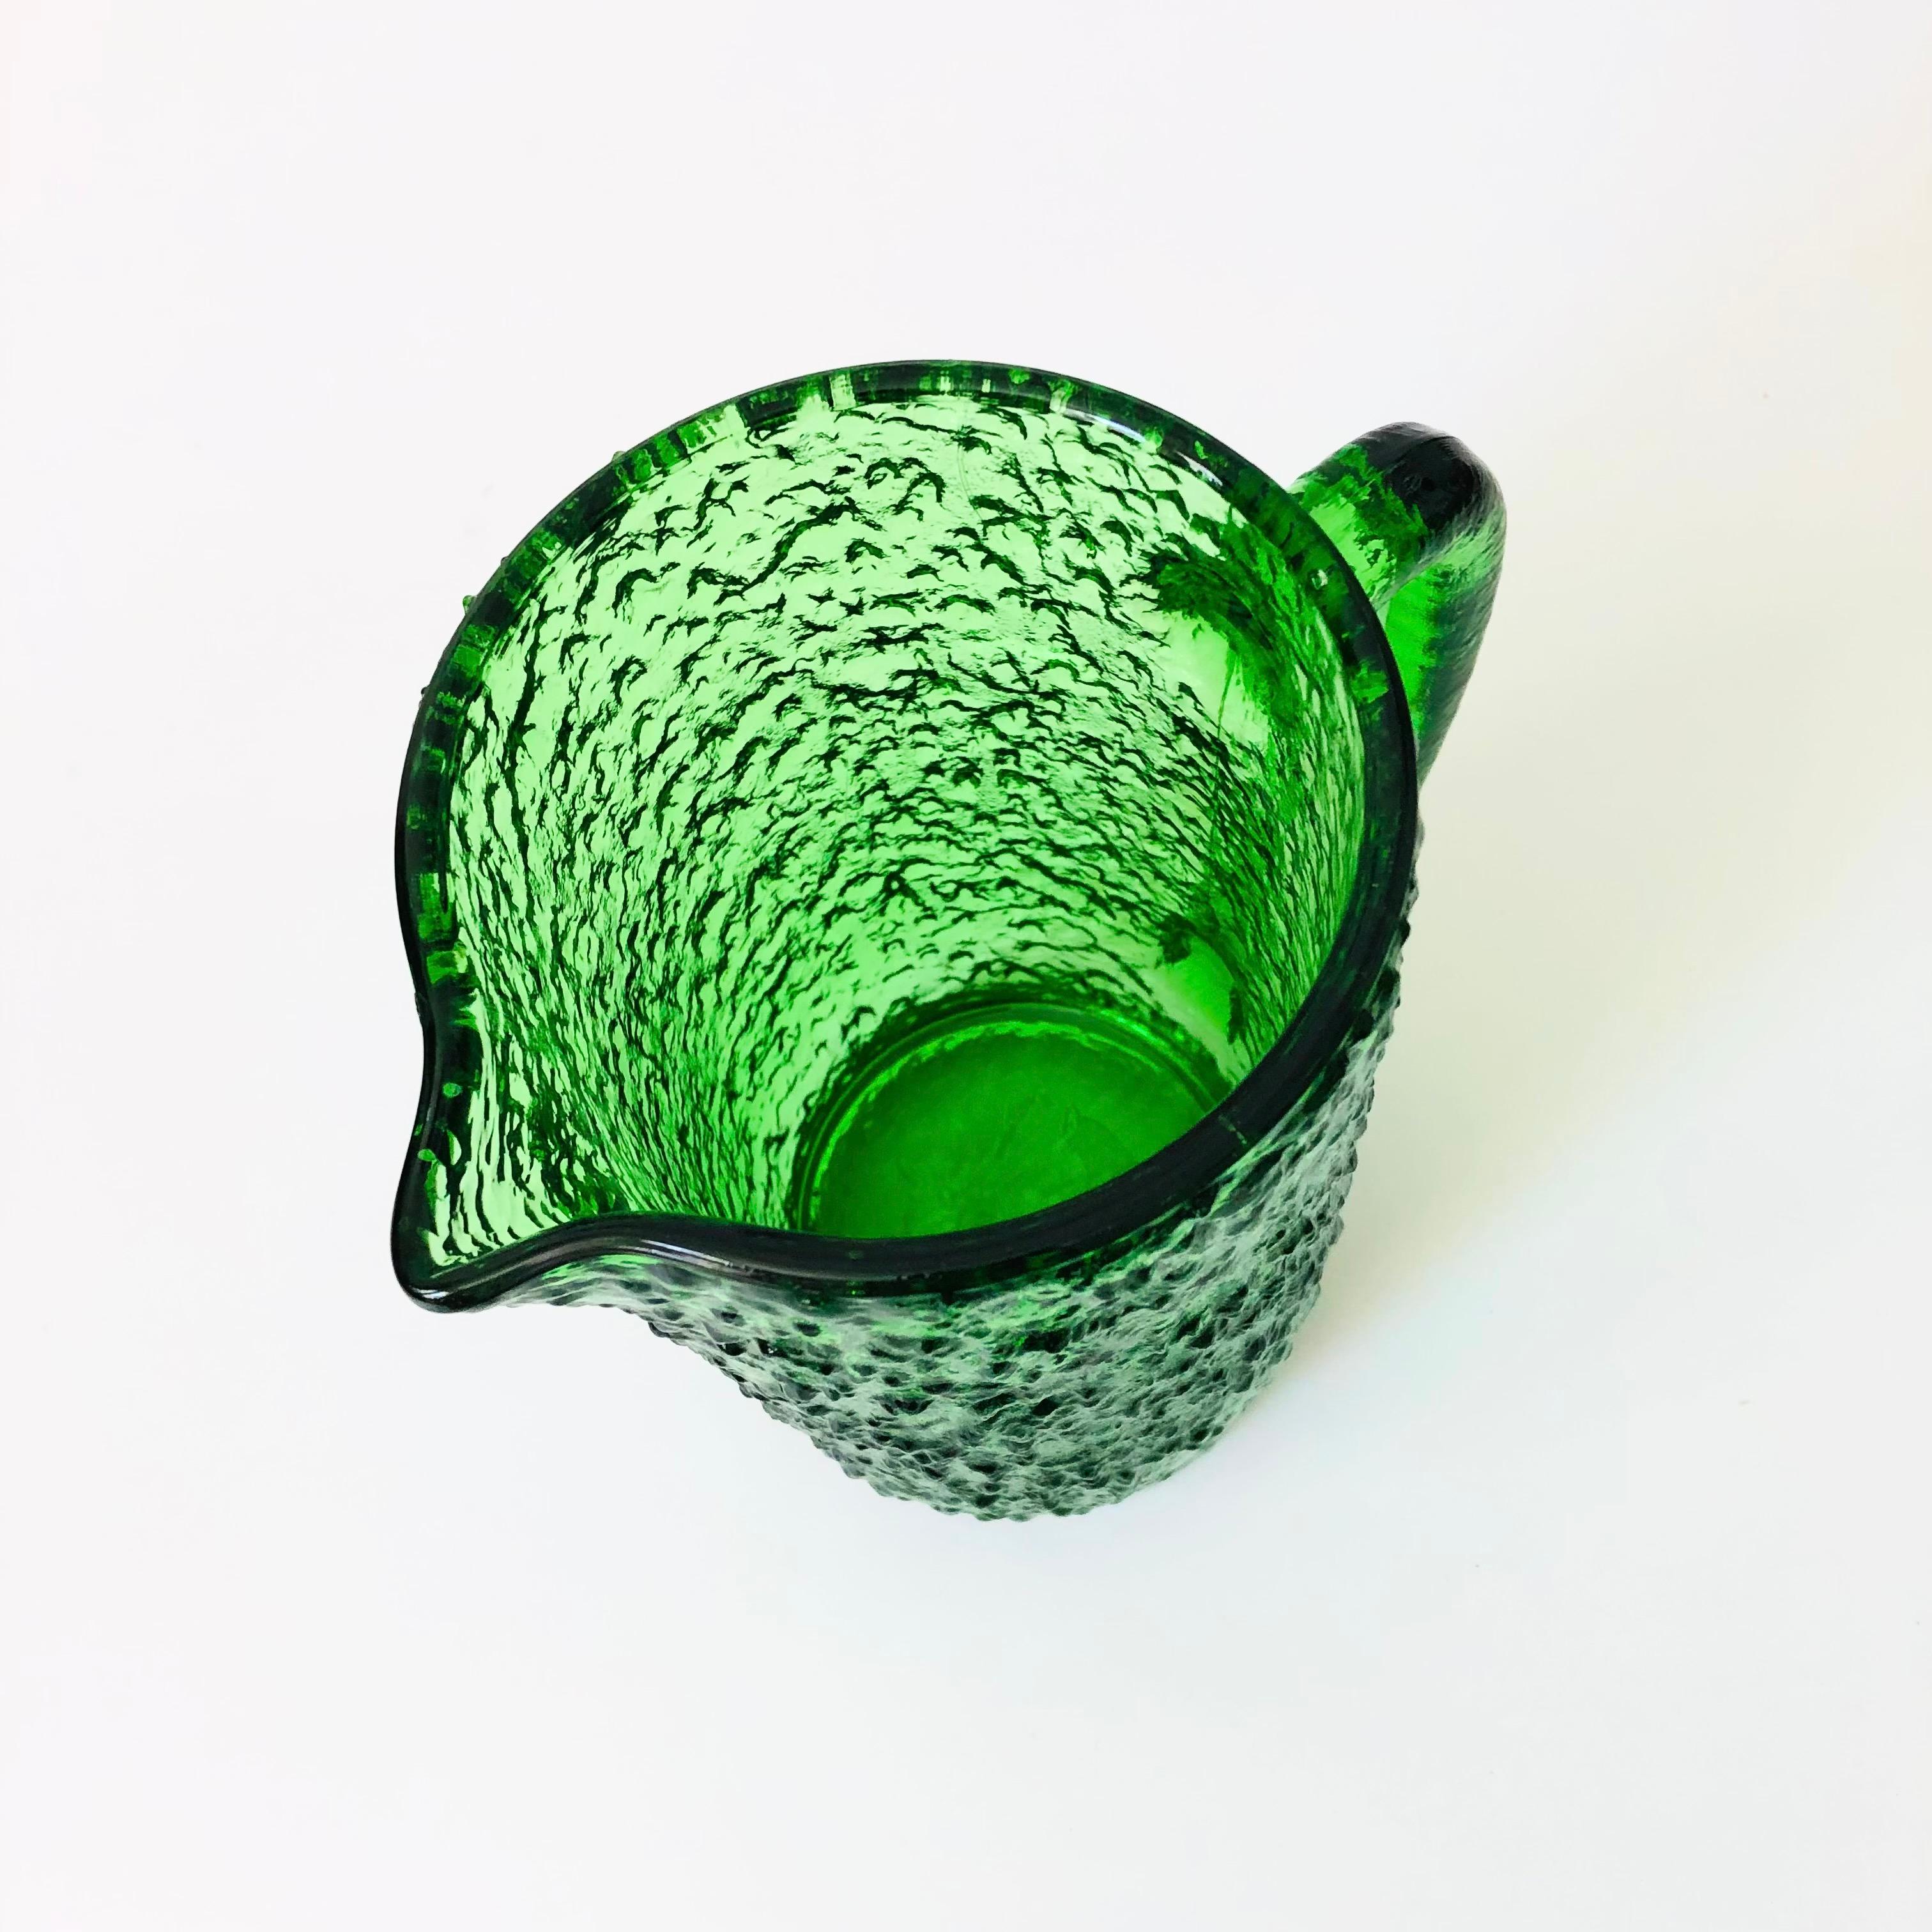 MCM Textured Green Glass Pitcher For Sale 2